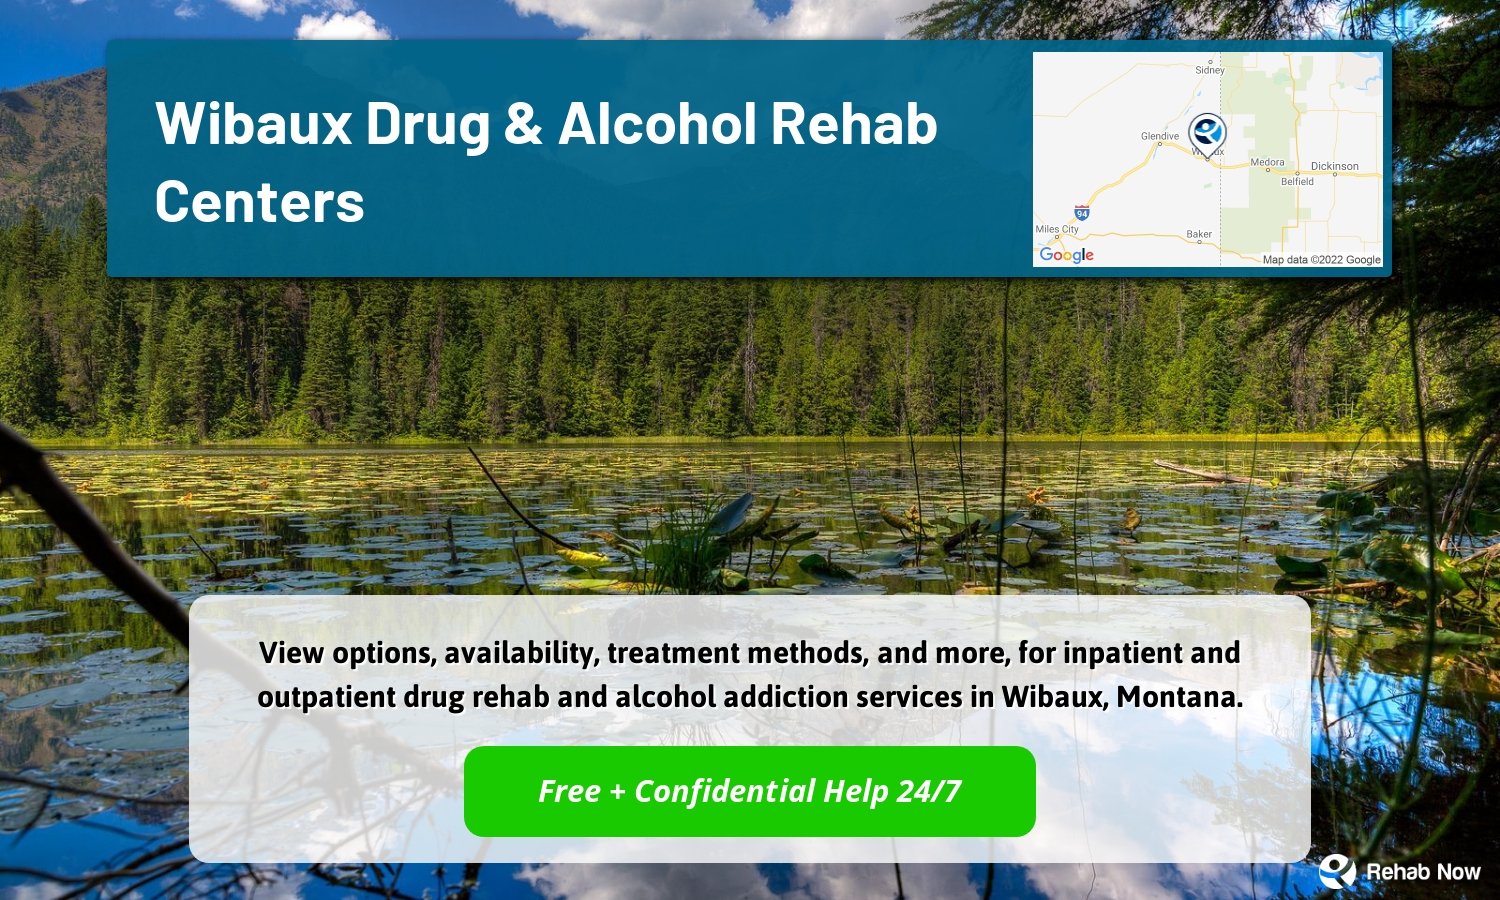 View options, availability, treatment methods, and more, for inpatient and outpatient drug rehab and alcohol addiction services in Wibaux, Montana.